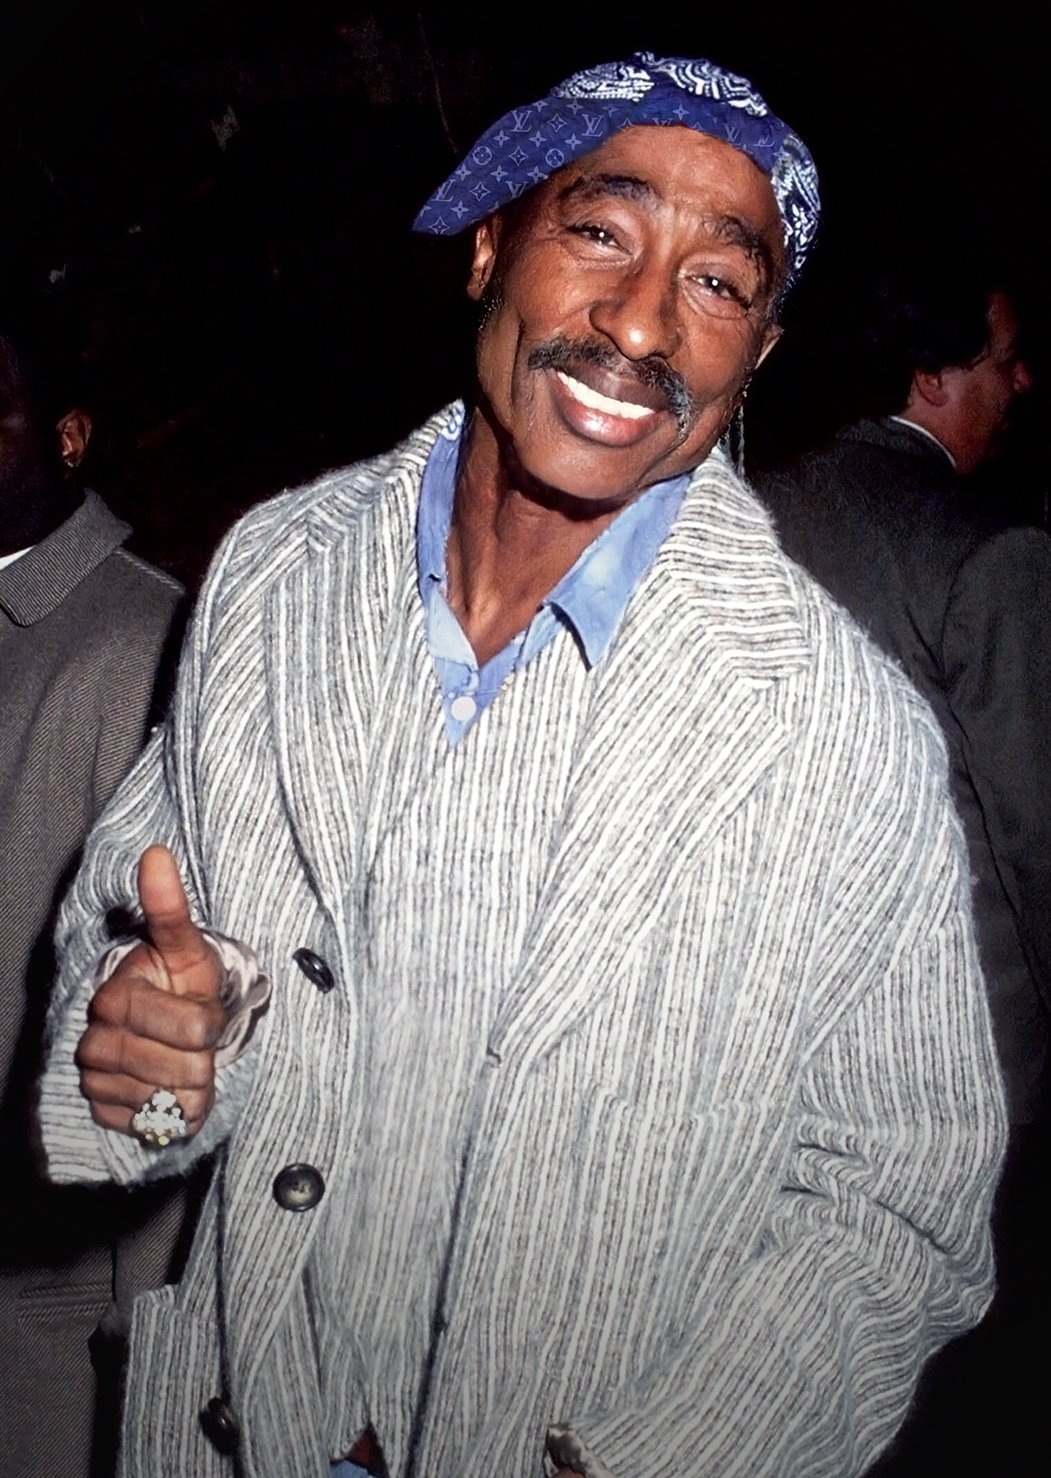 How Tupac Shakur Might Look Today Amid 24th Anniversary of His Death